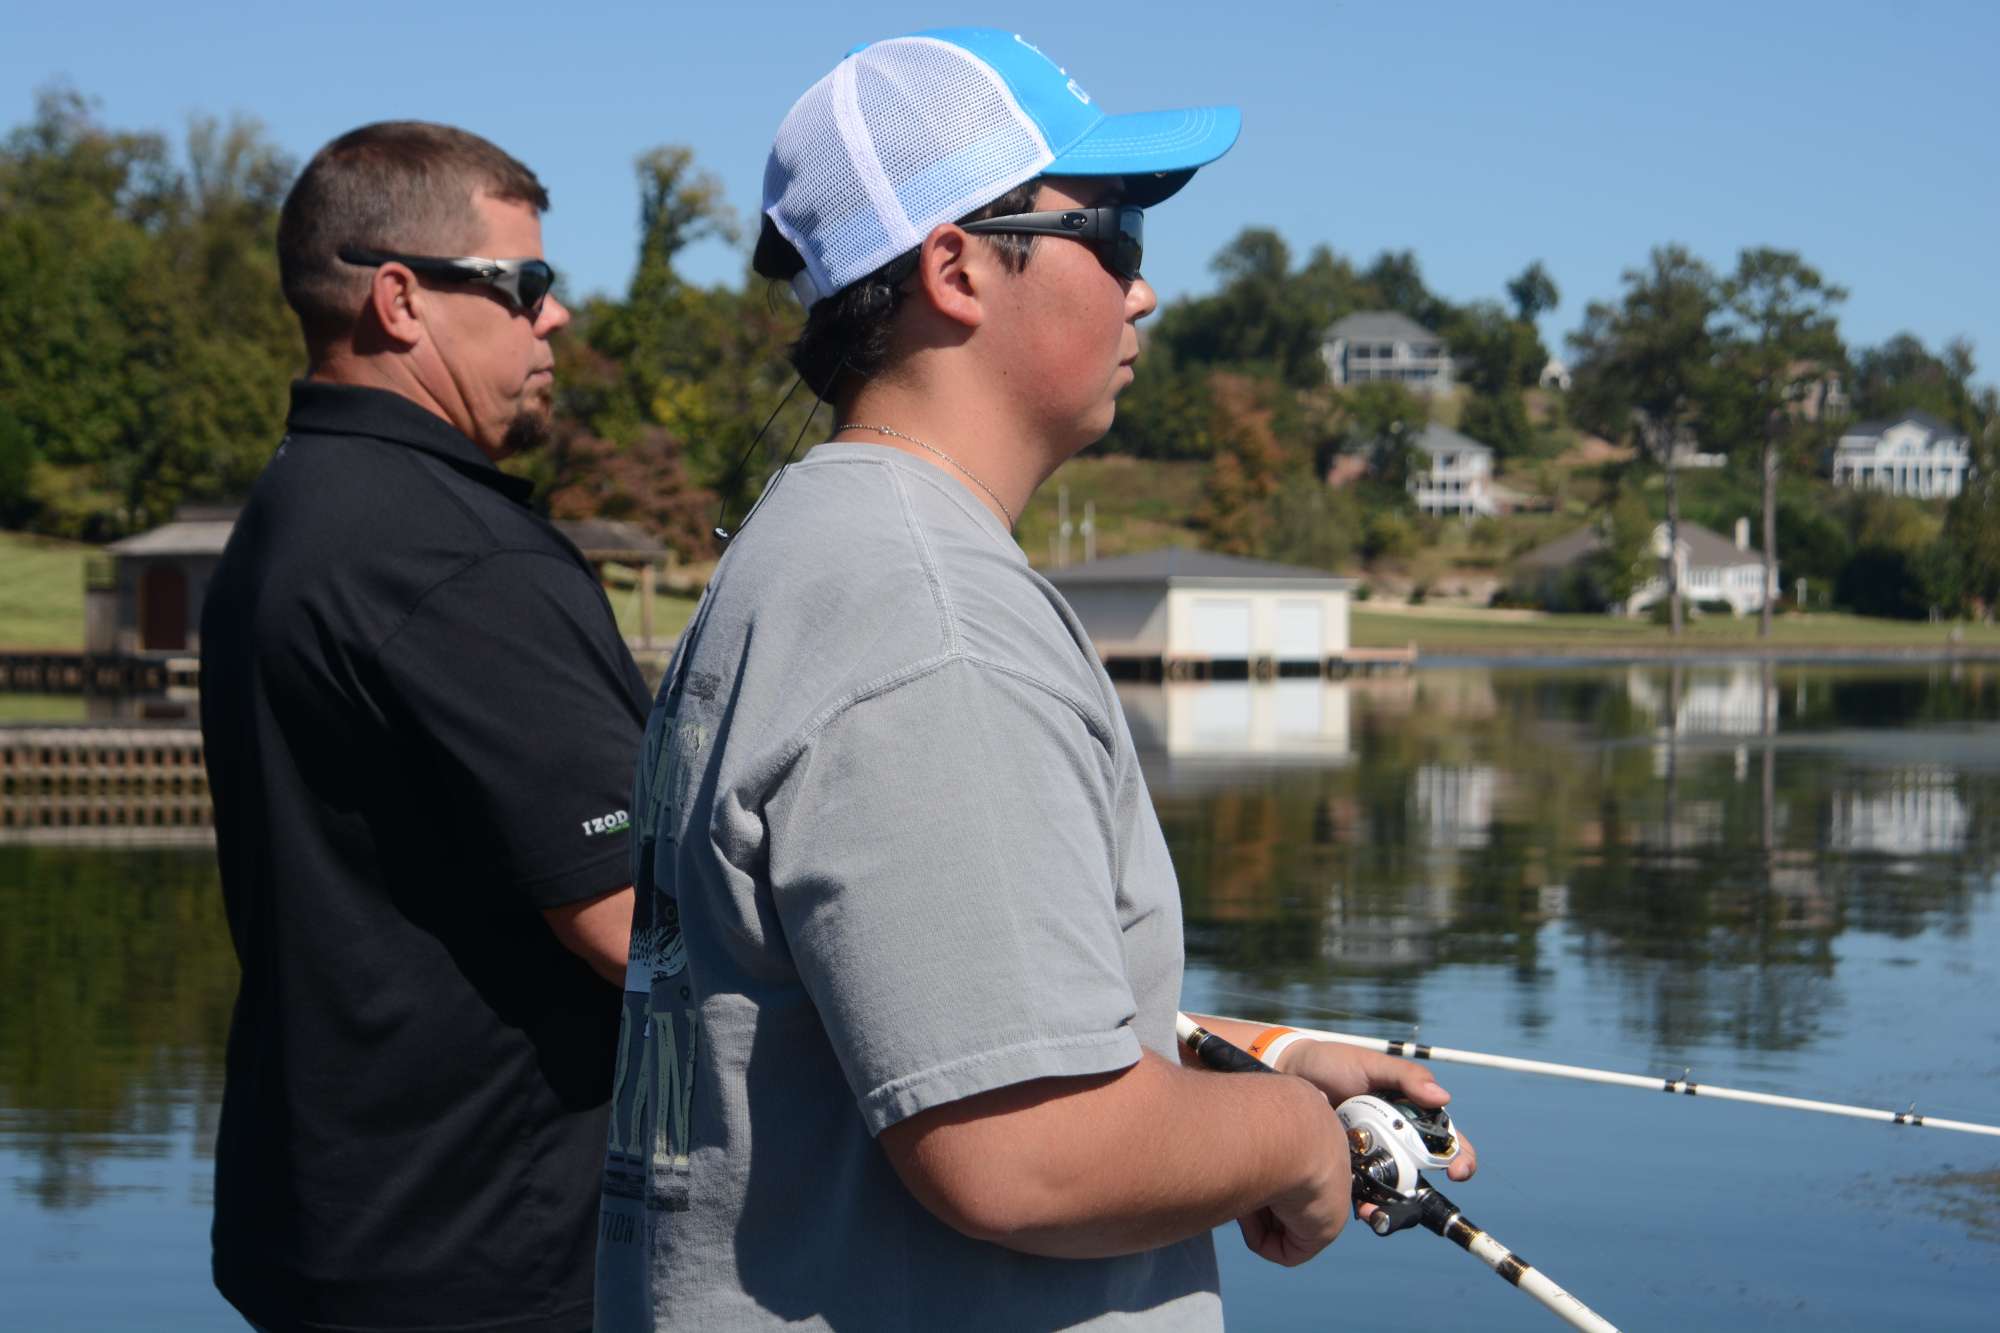 Lane instructs Ballard every step of the way, giving him suggestions on where to cast and how to reel in just right.